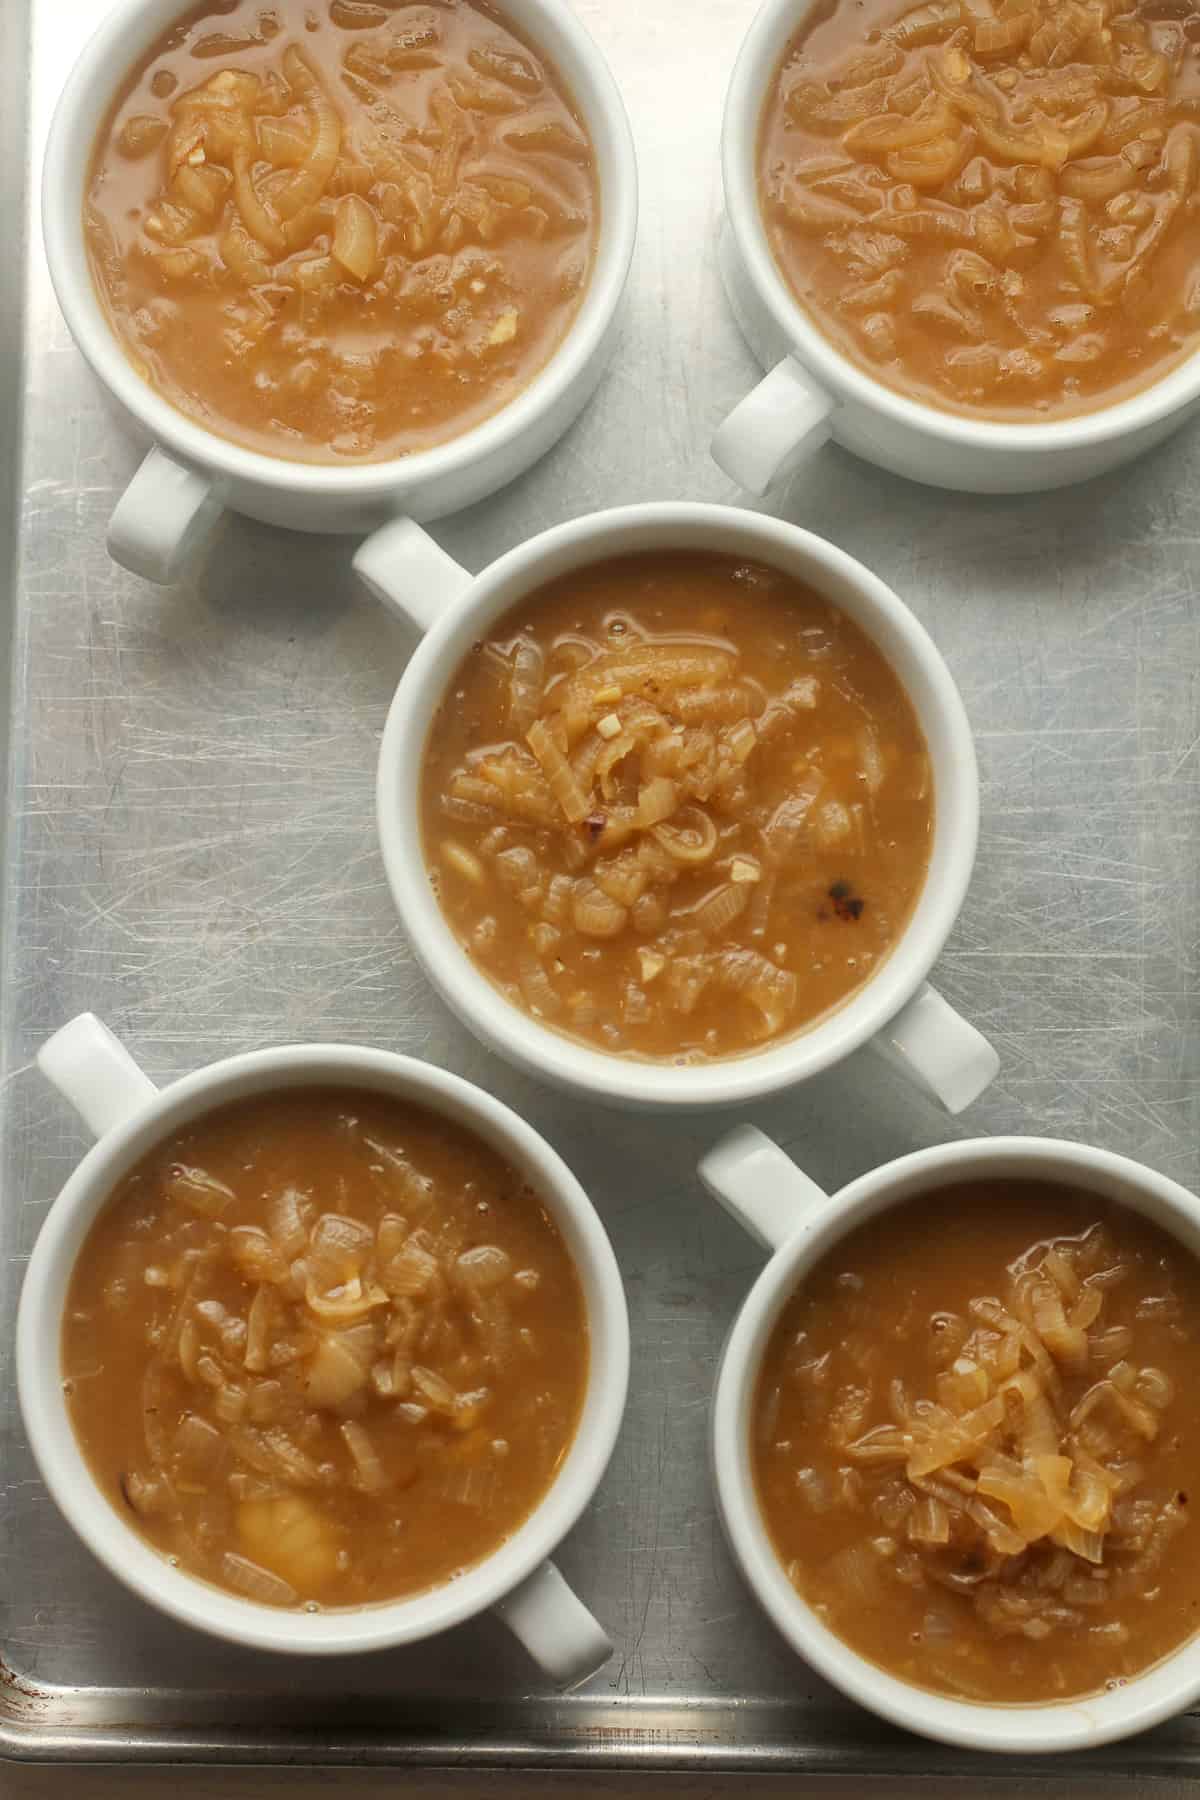 The bowls of onion soup before toppings.